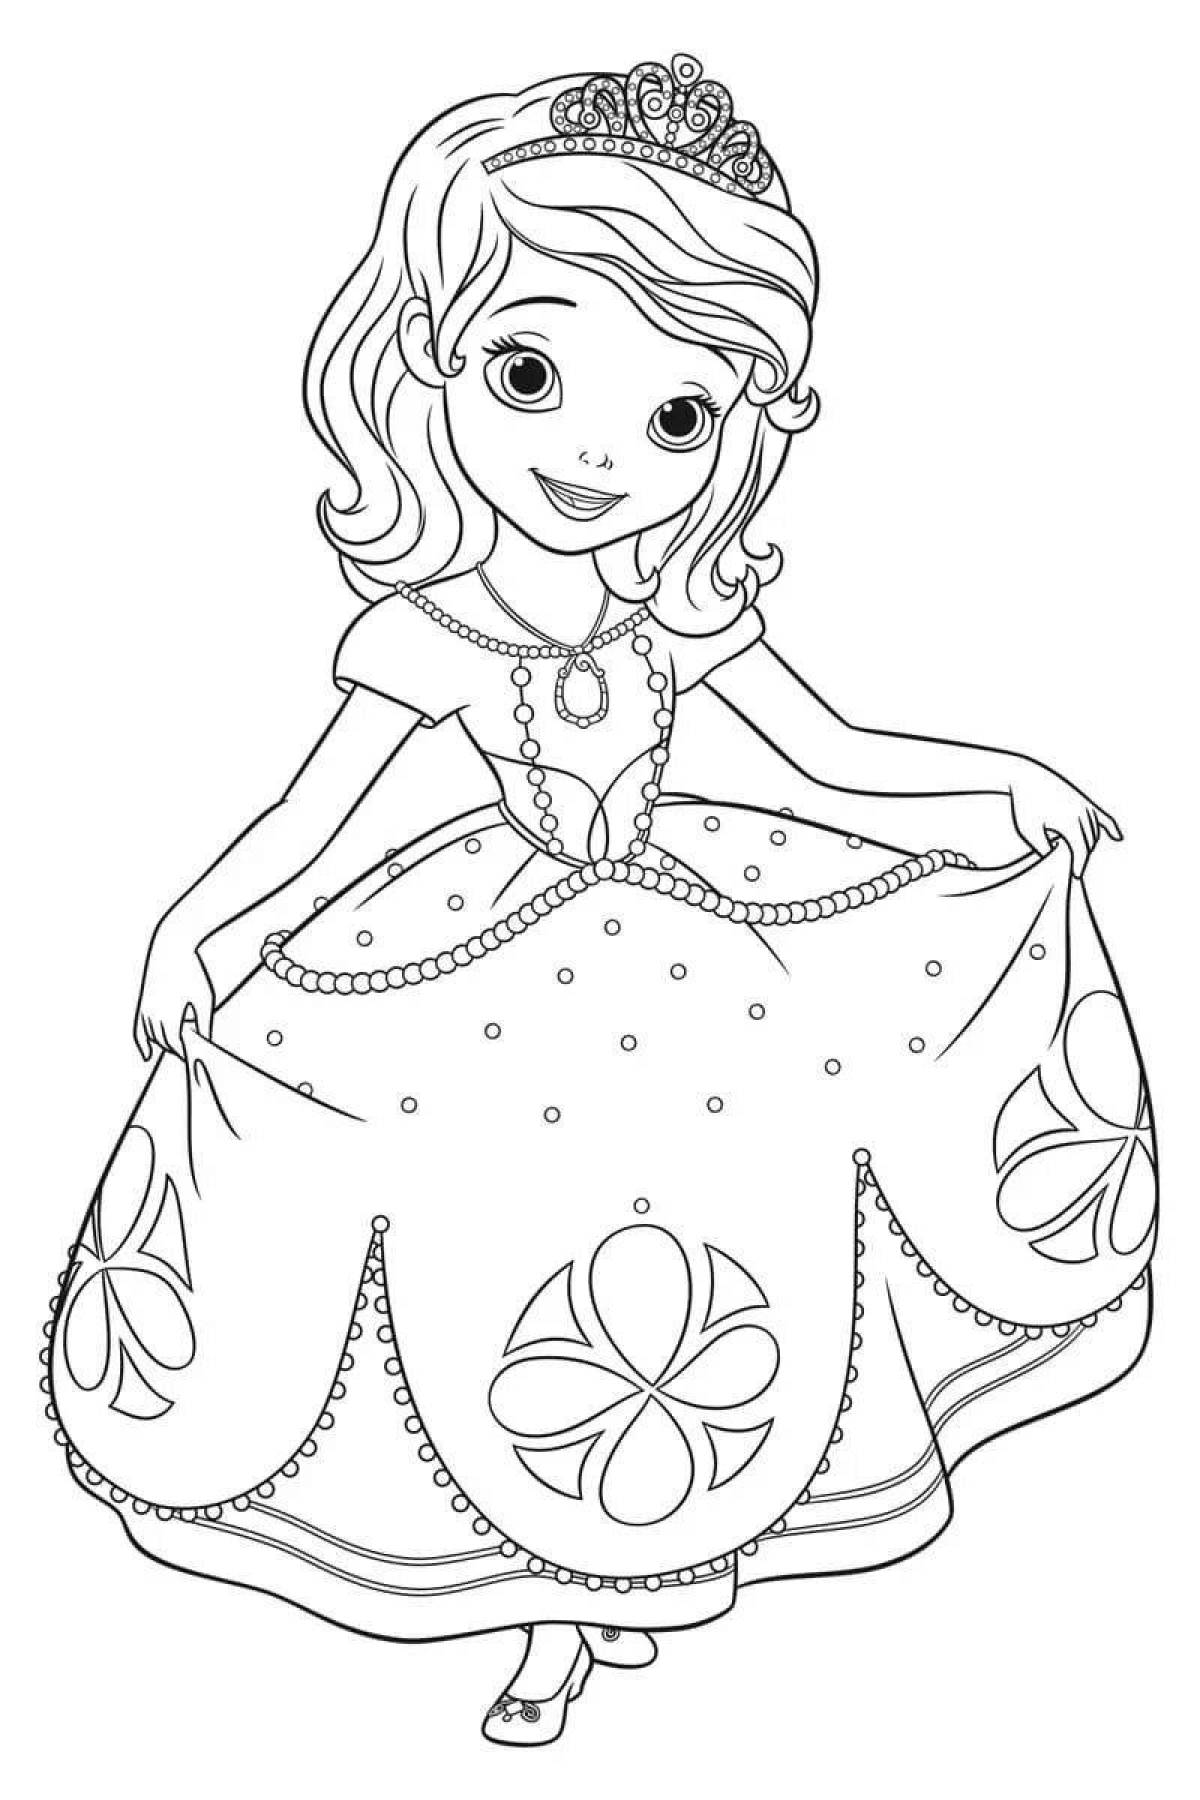 Fun princess coloring book for girls 4-5 years old